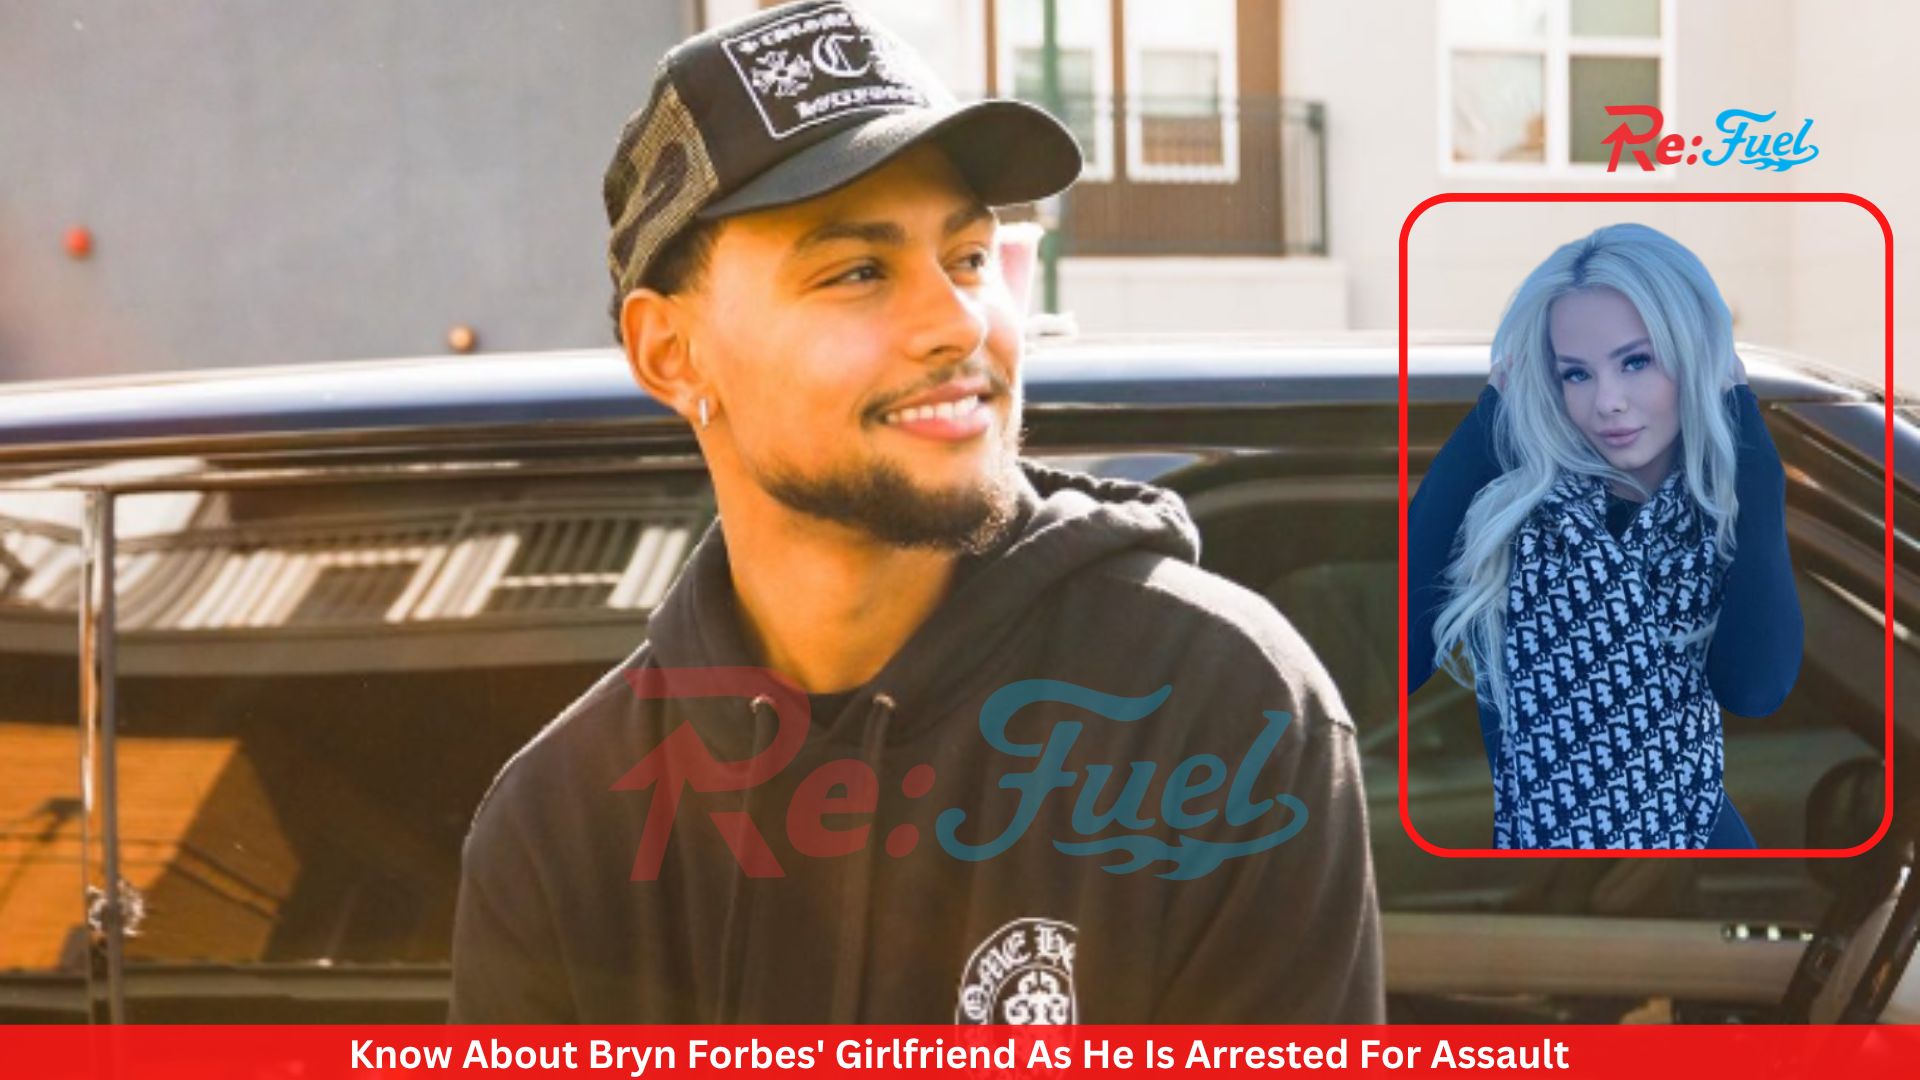 Know About Bryn Forbes' Girlfriend As He Is Arrested For Assault